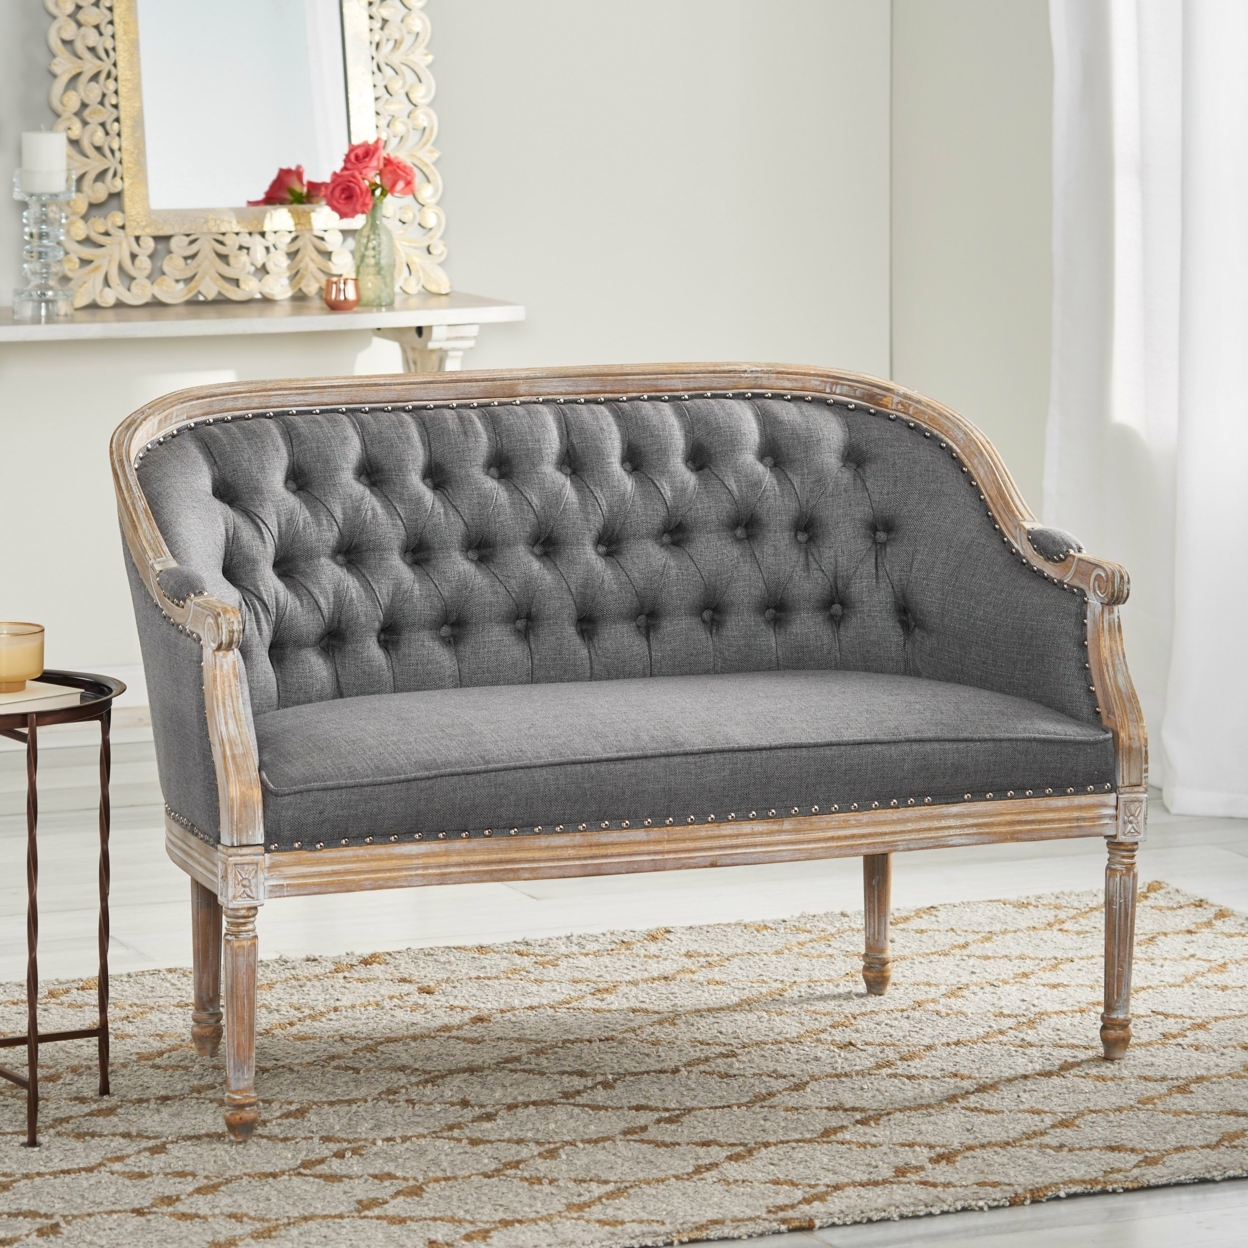 Megan Traditional Tufted Upholstered Loveseat - Antique/cognac, Faux Leather